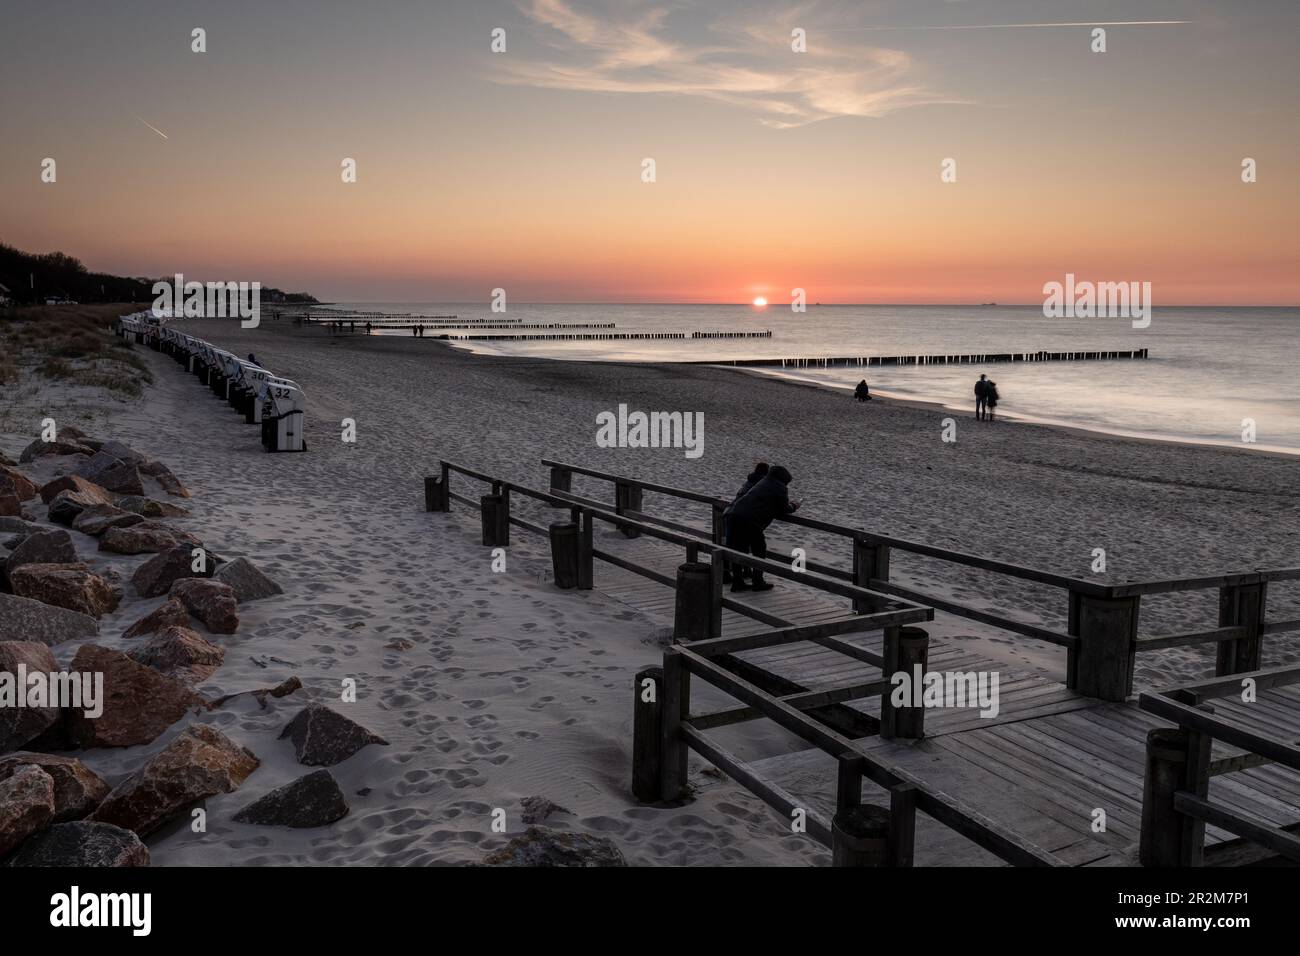 Kuehlungsborn, Germany, Baltic Sea coast: evening atmosphere and sunset at the beach Stock Photo